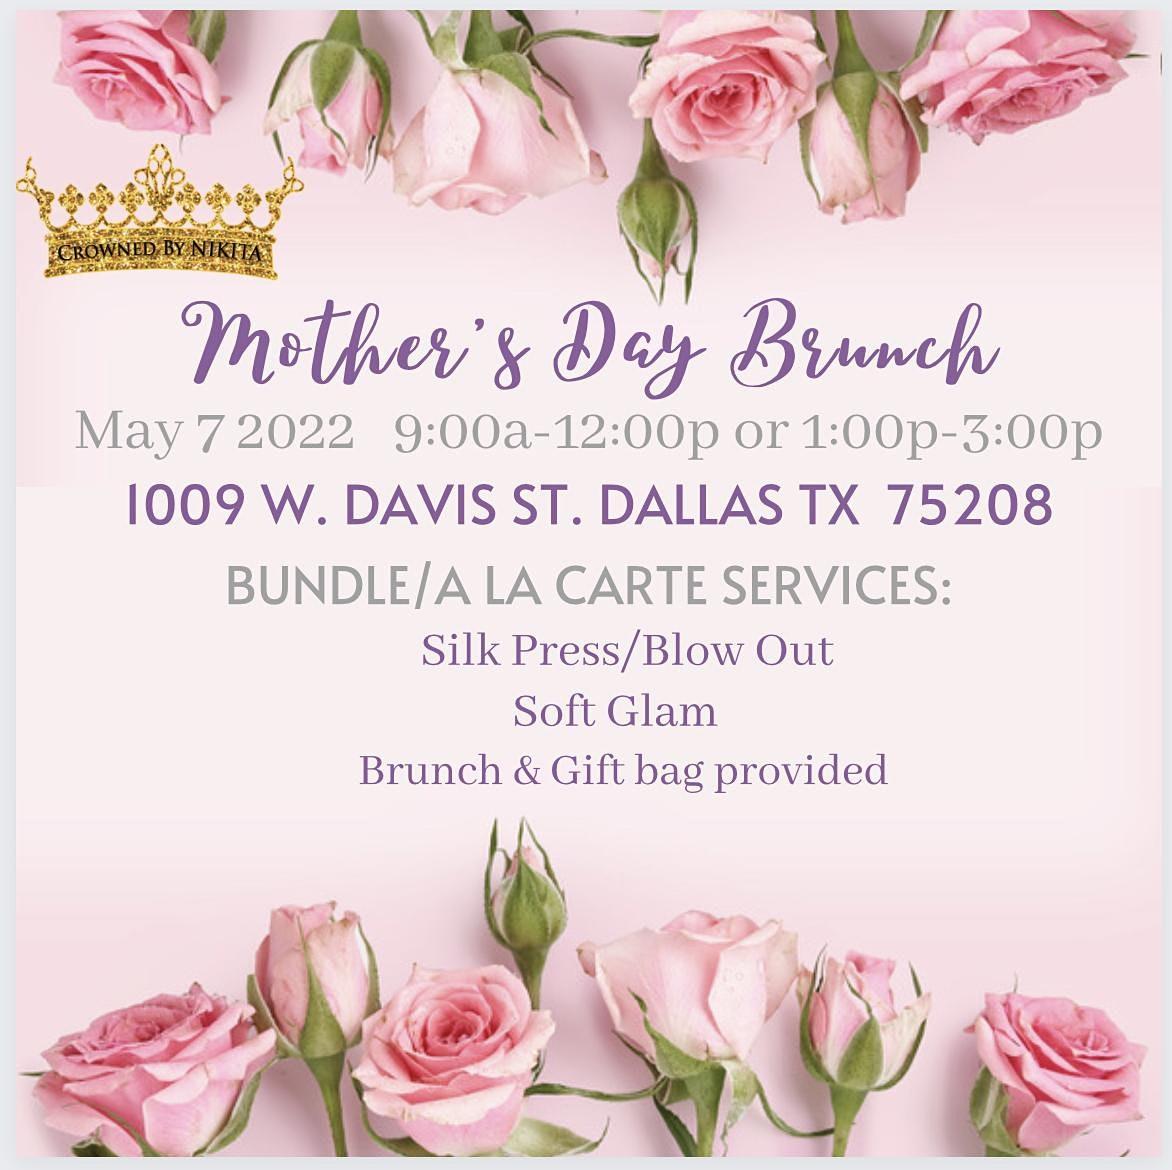 Mother's Day Brunch at Crowned by Nikita Beauty Salon